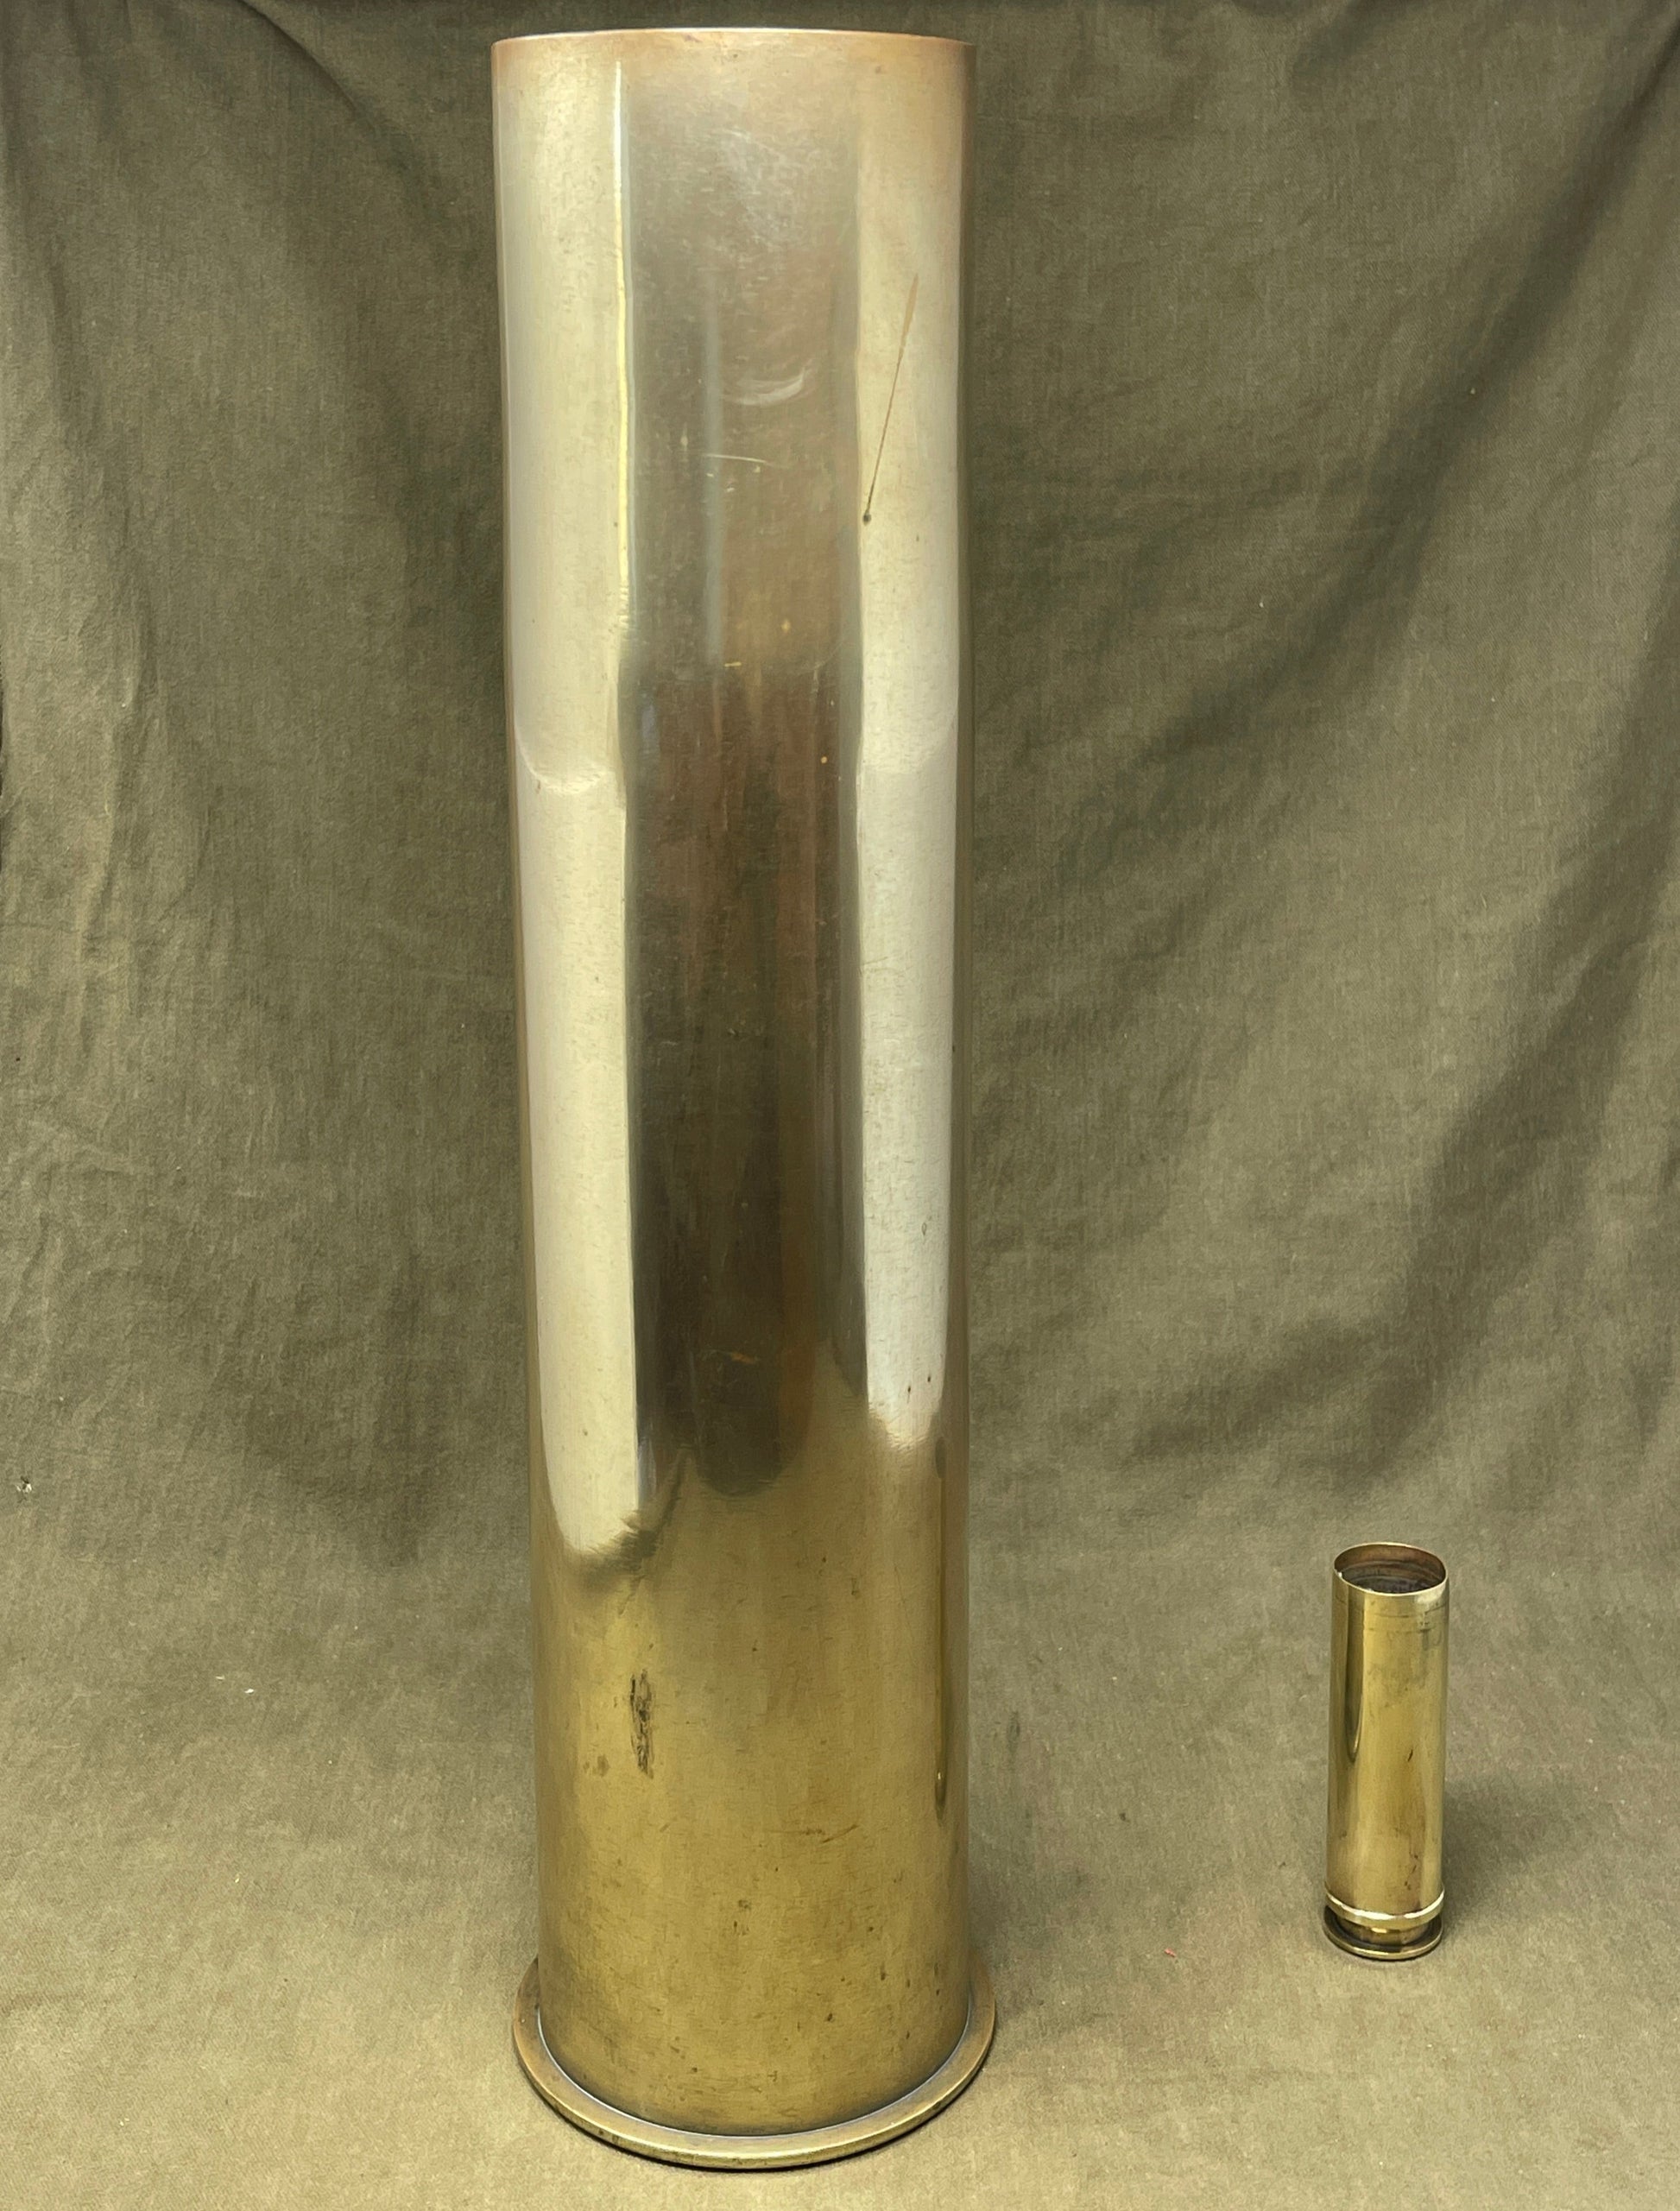 German brass 105mm artillery shell case was later used as an umbrella stand. The base is impressed 'Karth. Sp.255 446 MAI 1917 PATRONENFABRIK KARLSRUHE'. The striker is impressed 'FL 14B Sb'.